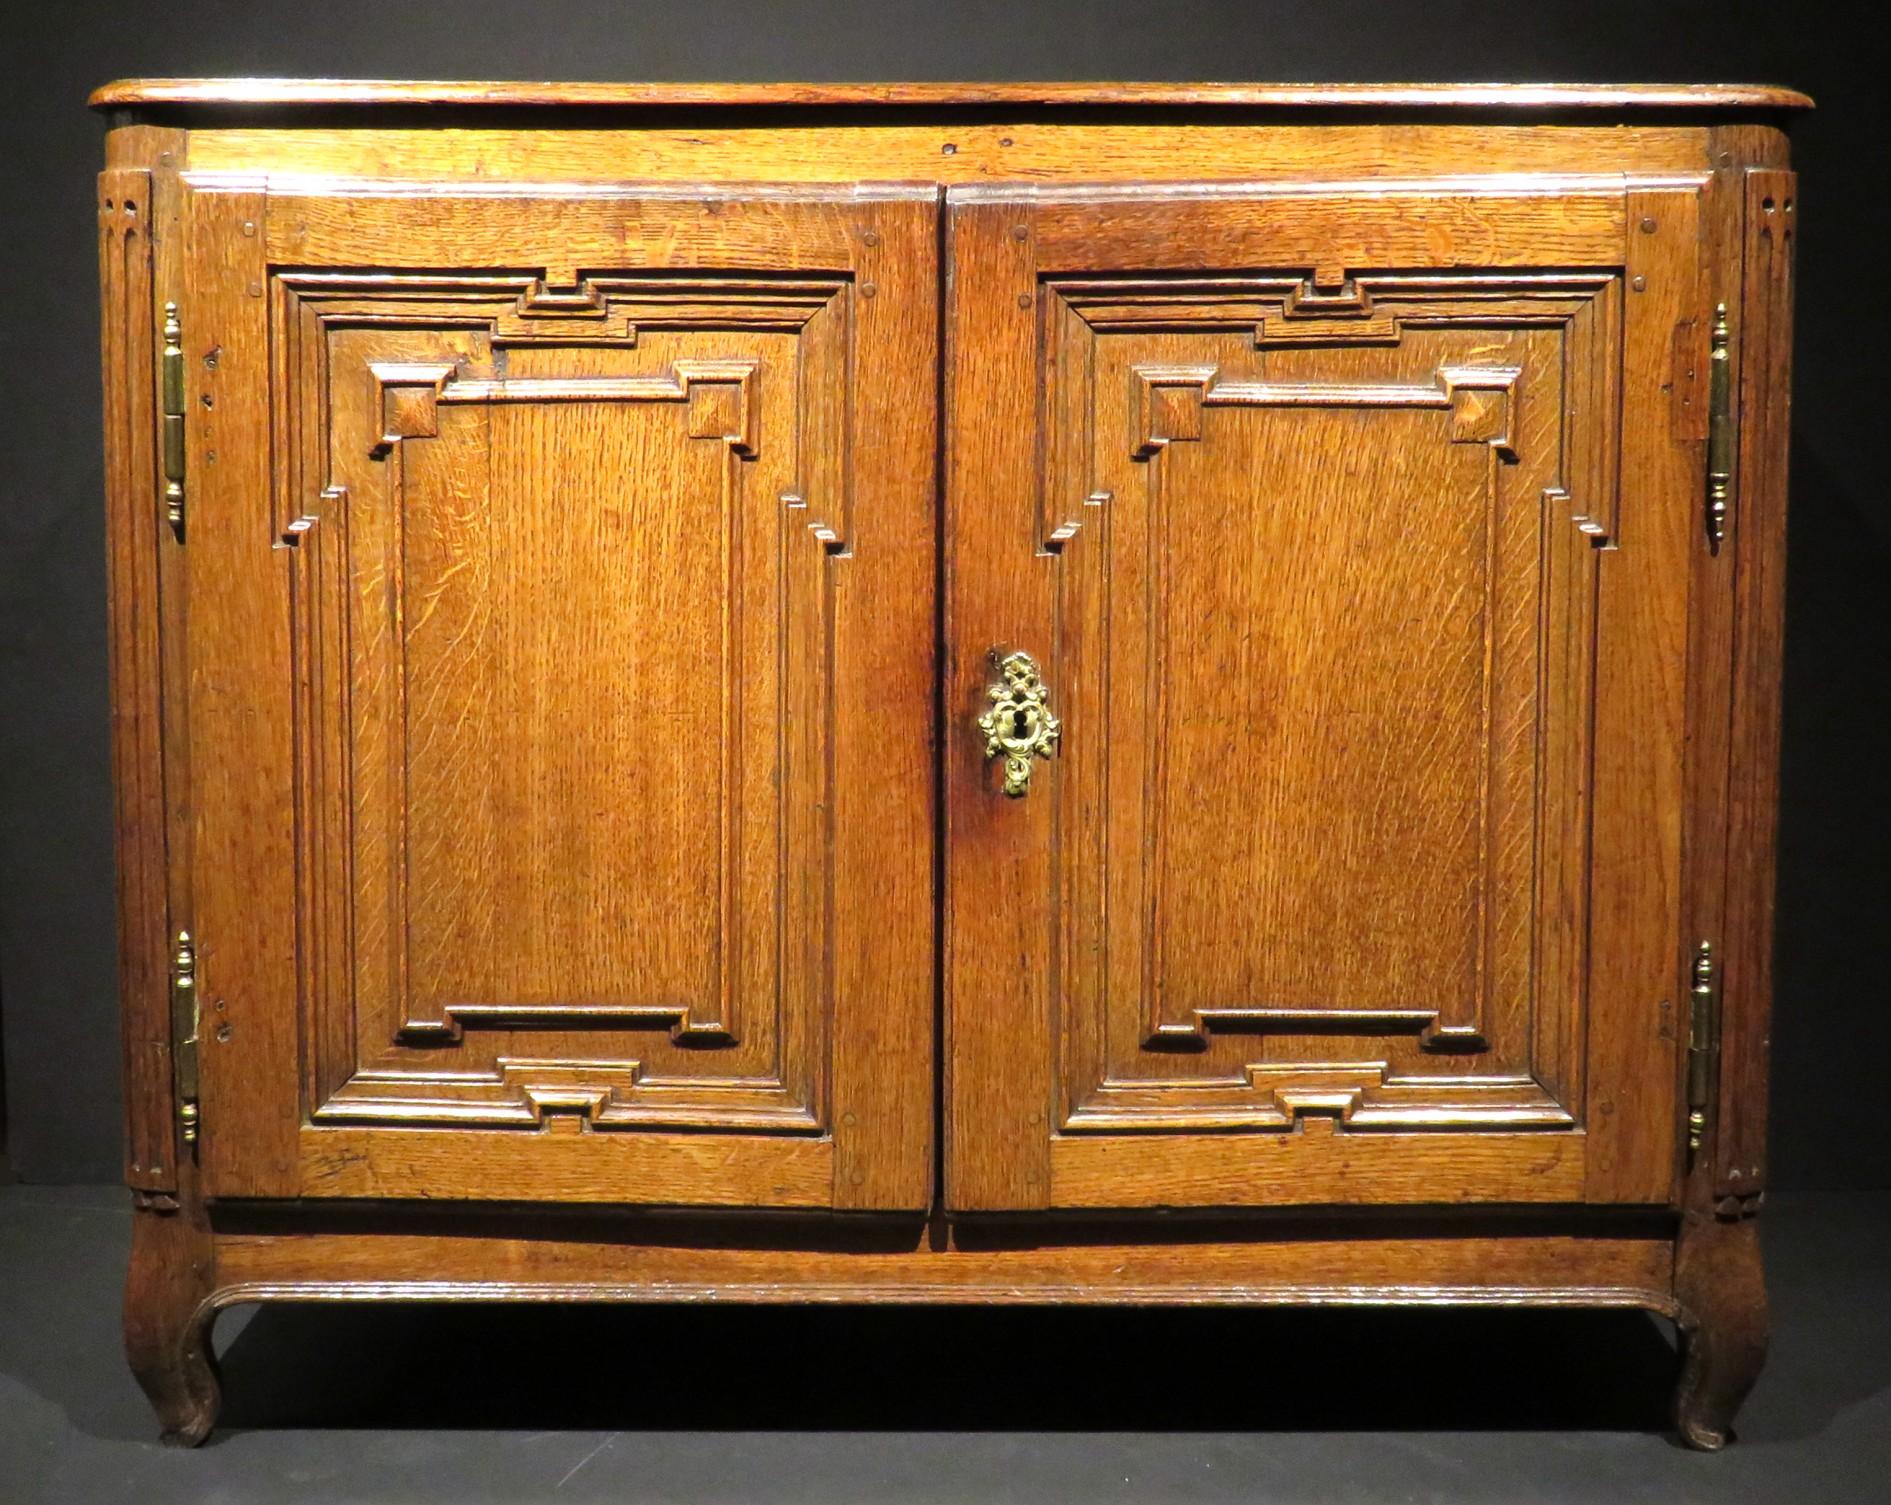 A very handsome & diminutive 18th century Louis XV oak buffet, demonstrating superior form & exacting proportions. The panelled case showing traditional peg-joined mortise & tenon construction, the framed sides inset with floating panels, the front